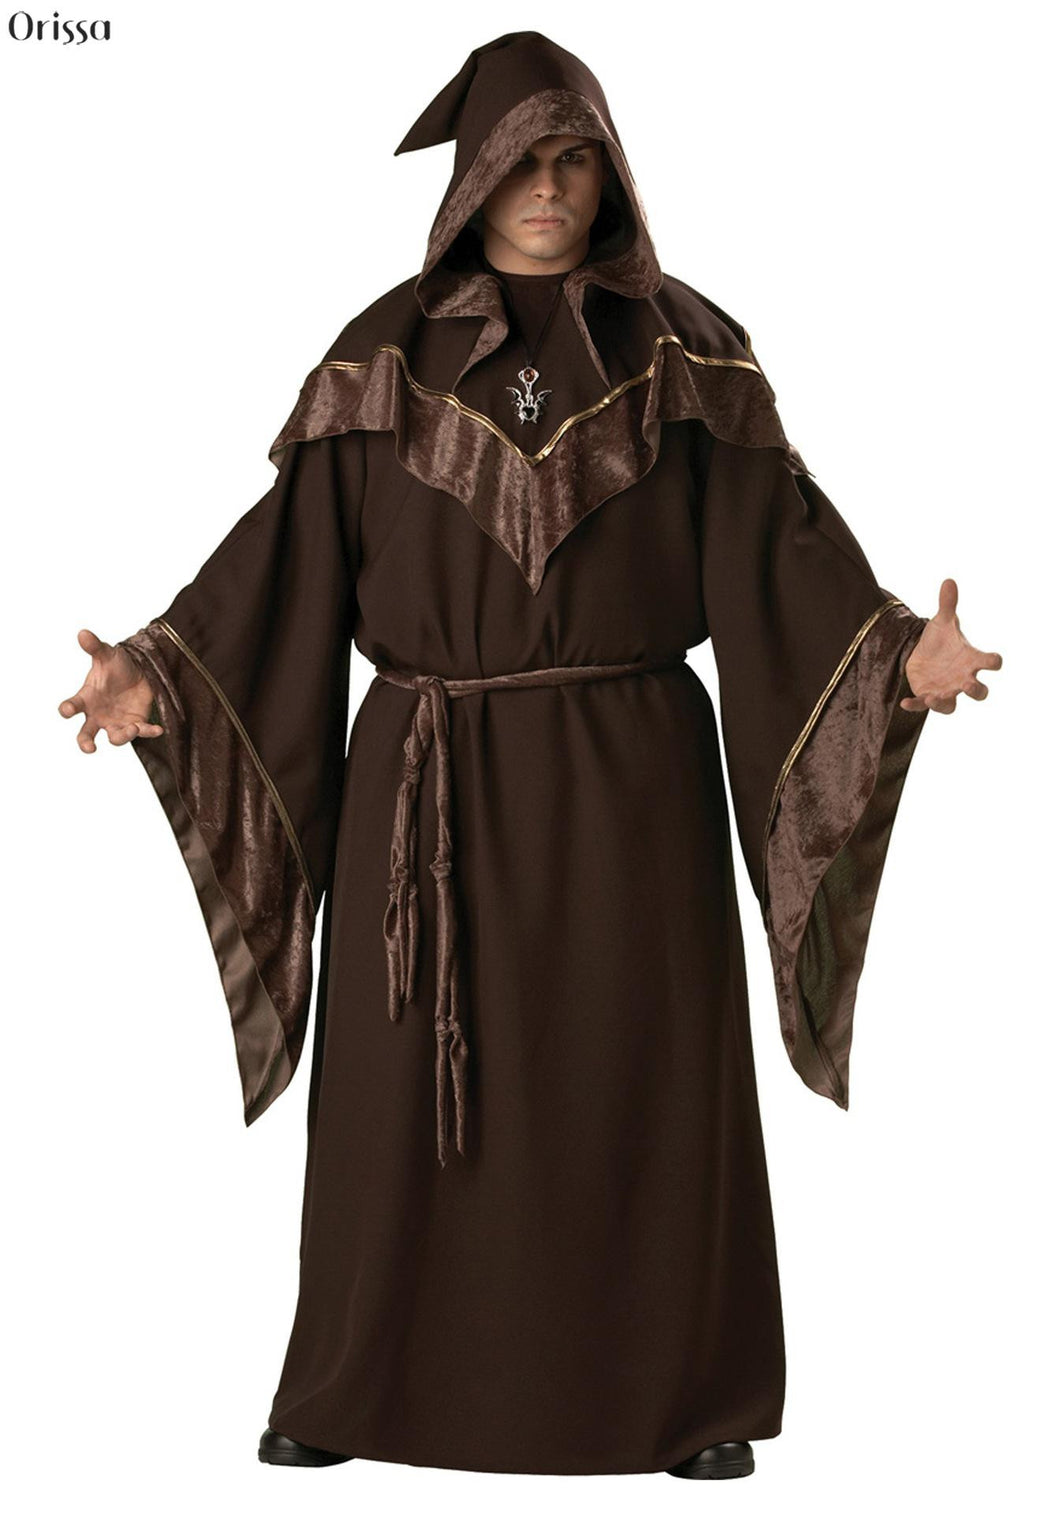 Robe with hood, cowl, and sash for Wizards or Magic Users, Monks and Priests perfect for LARP or Cosplay